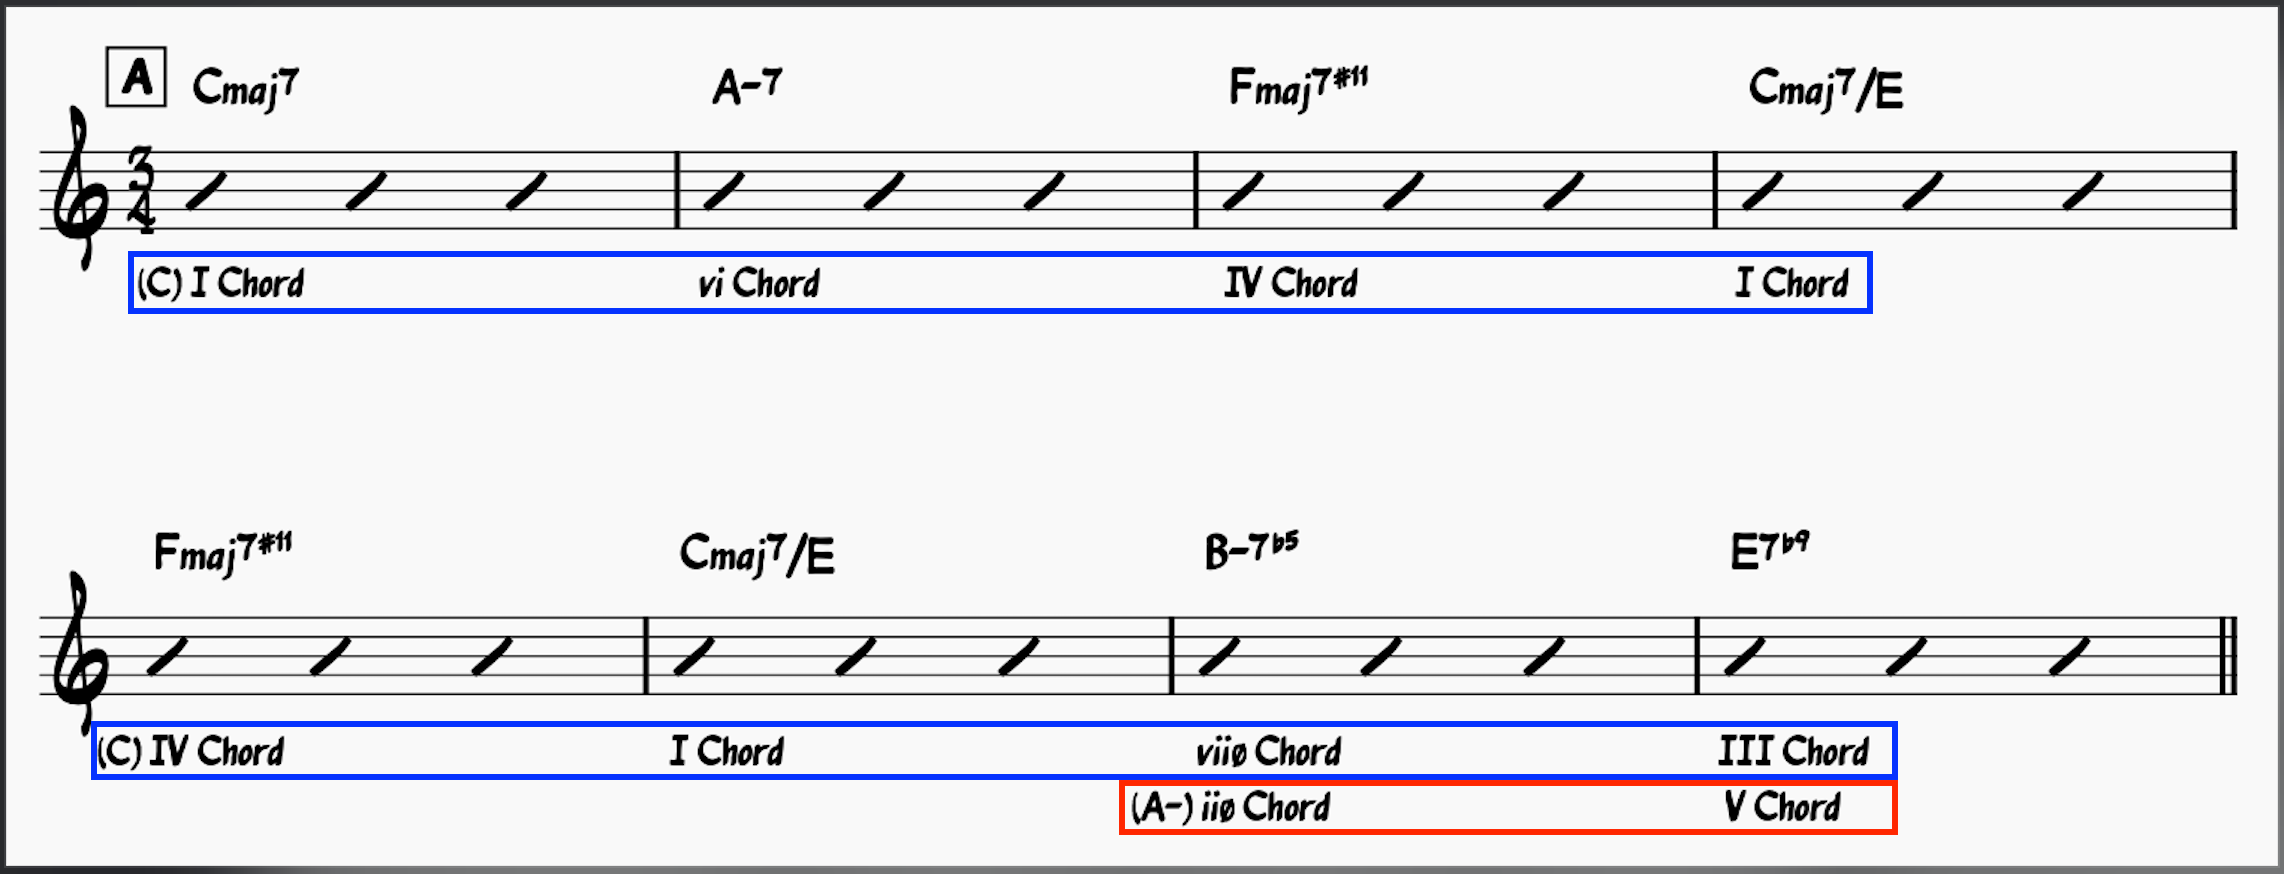 Moon River chords: A section